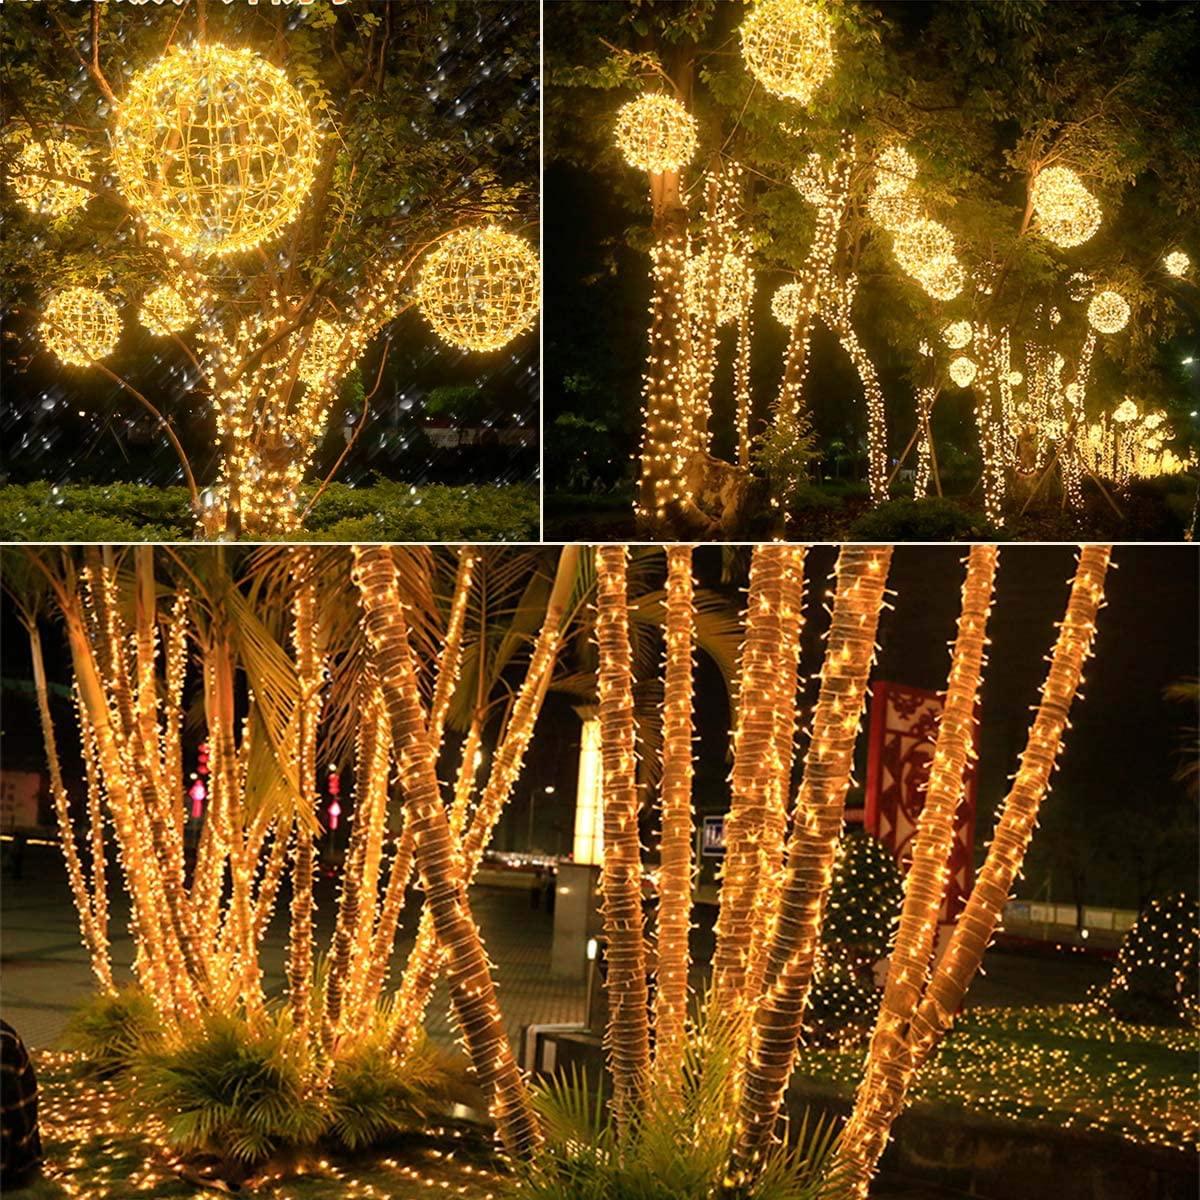 Ollny Christmas Lights 800 LEDs 330ft LED Outdoor String Lights Warm White with